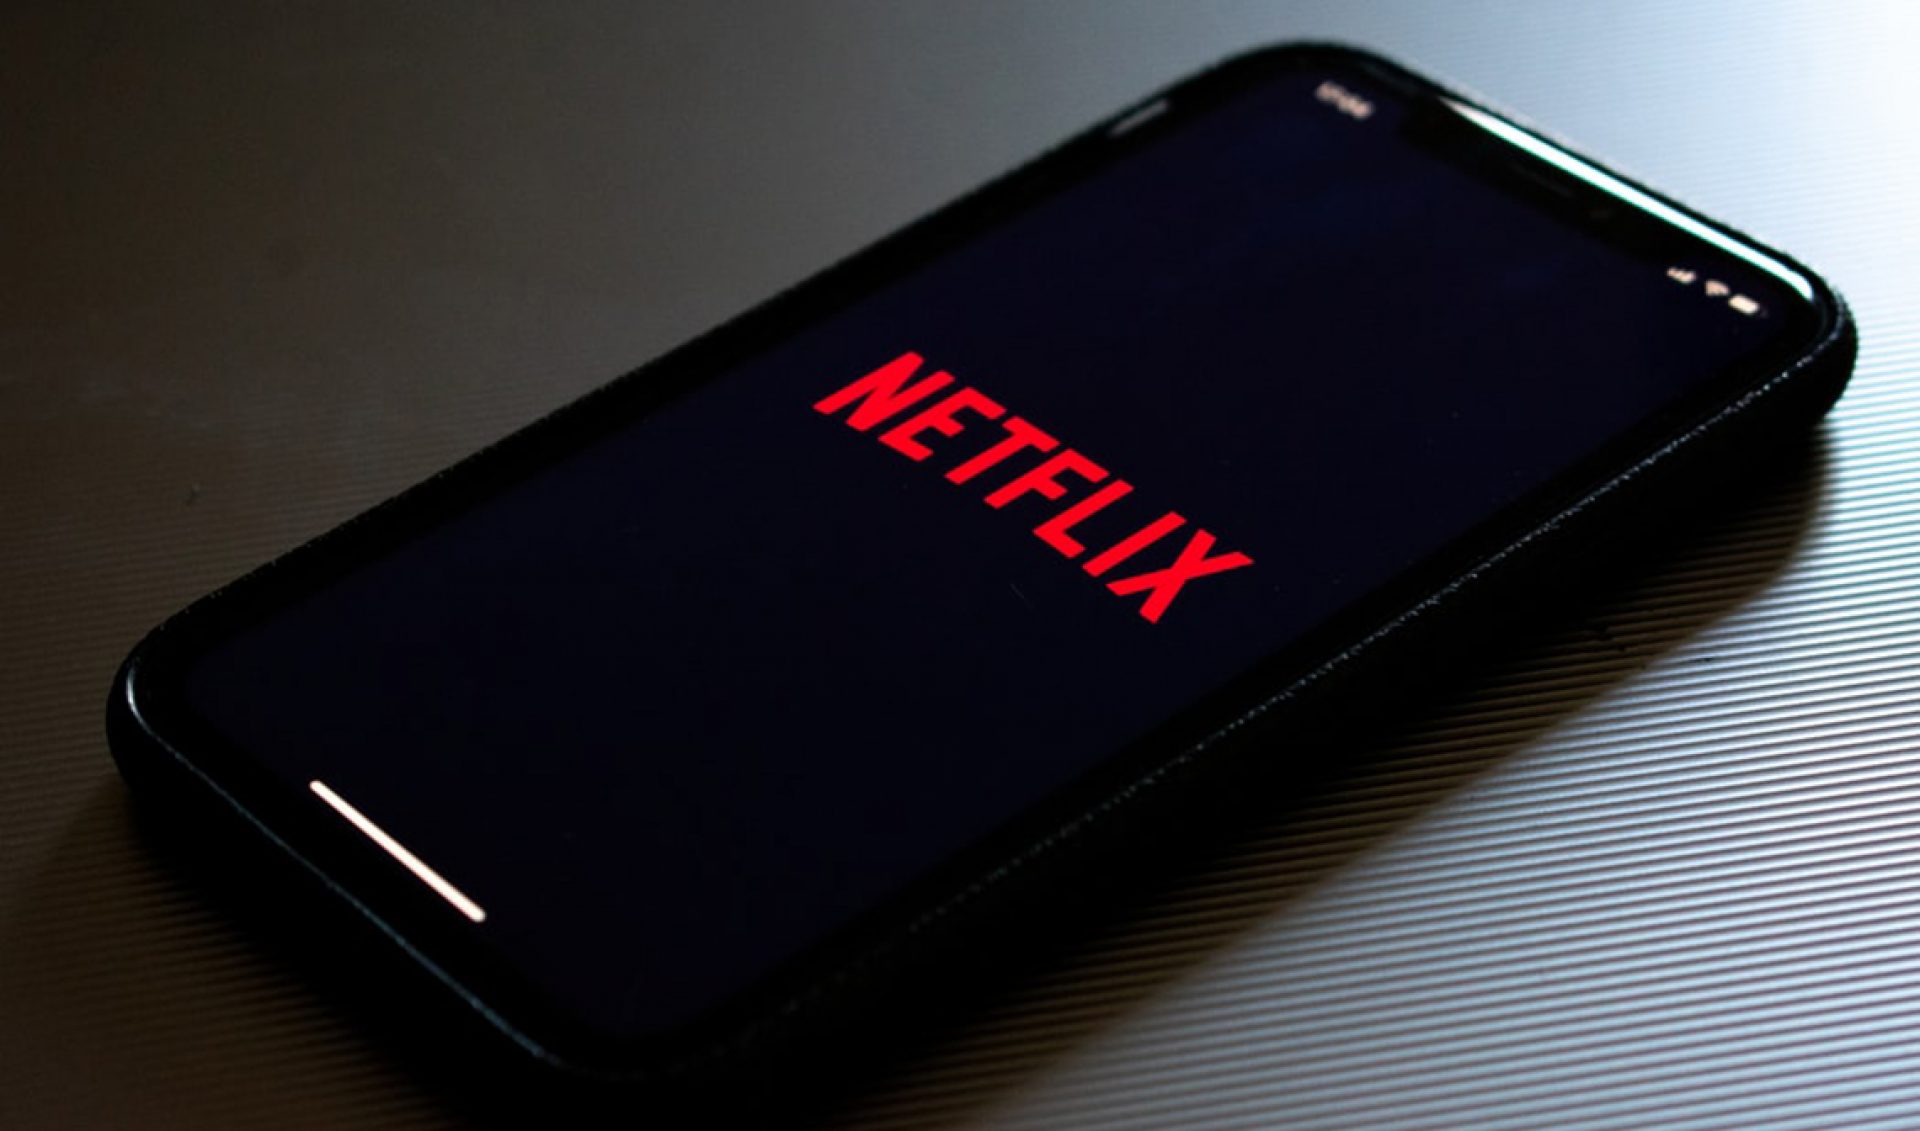 Netflix Raises Subscription Prices In The U.S., Causing Shares To Jump 4%